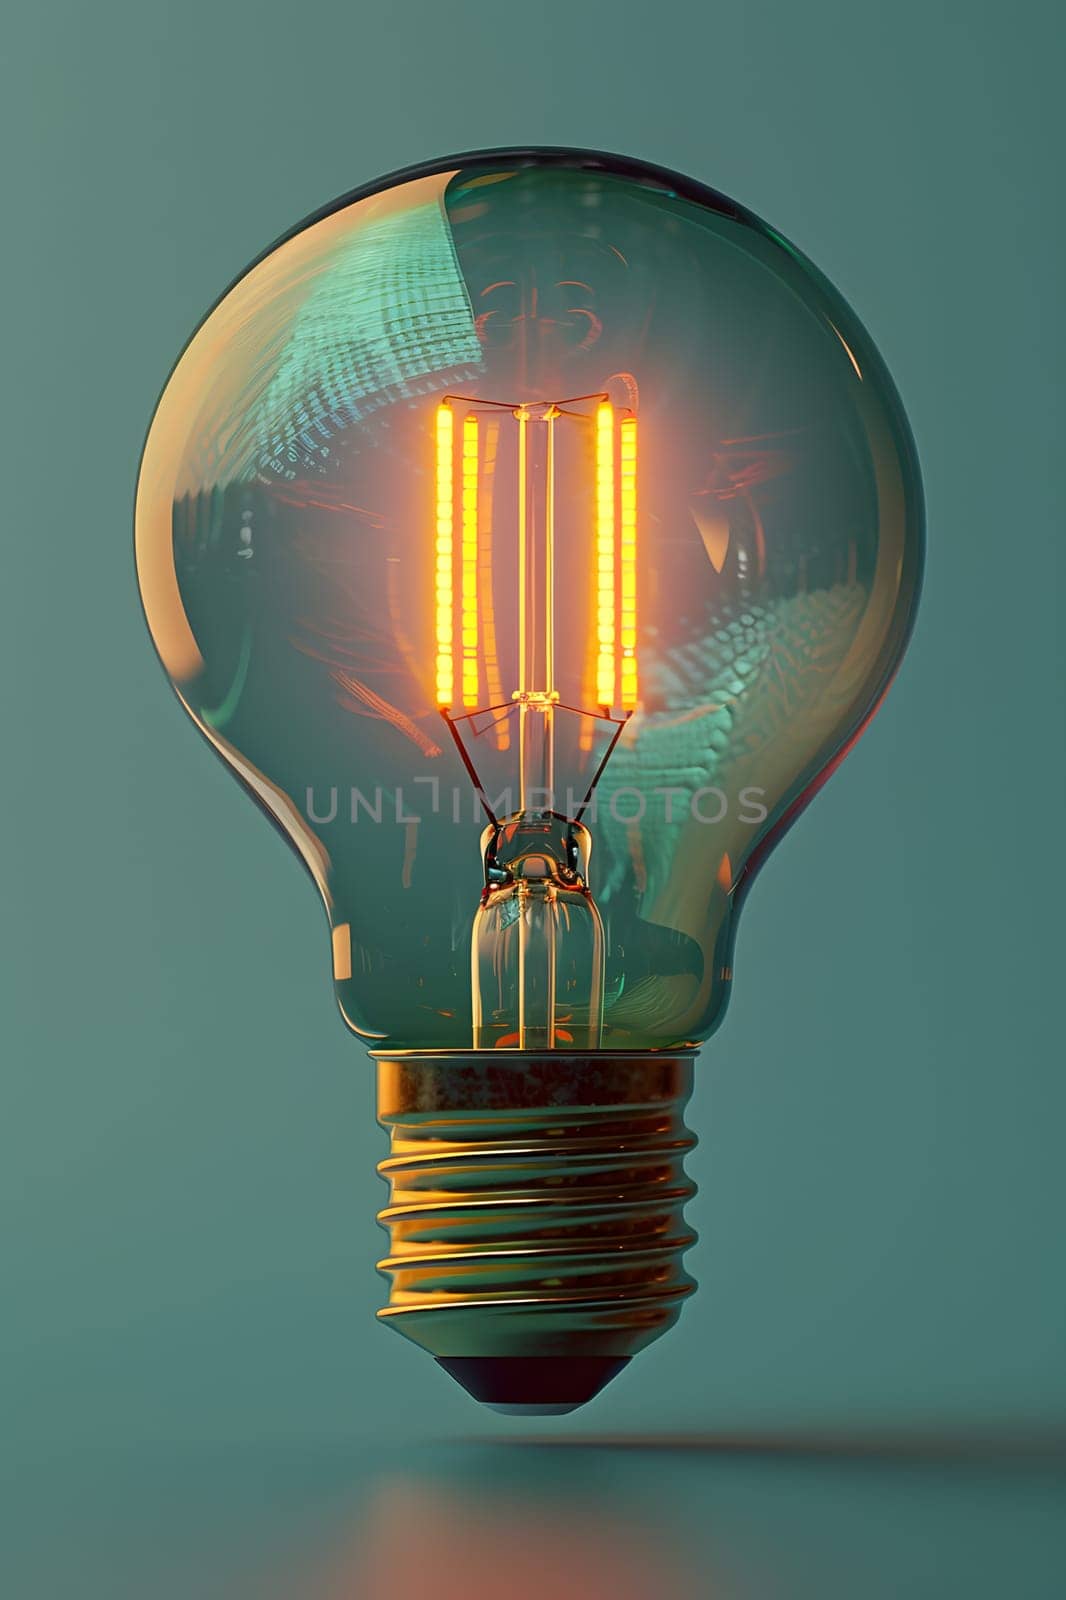 A closeup shot of a fluorescent light bulb glowing on a blue background, showcasing its amber hue. The bright light symbolizes the power of electricity in lighting up streets and automotive vehicles